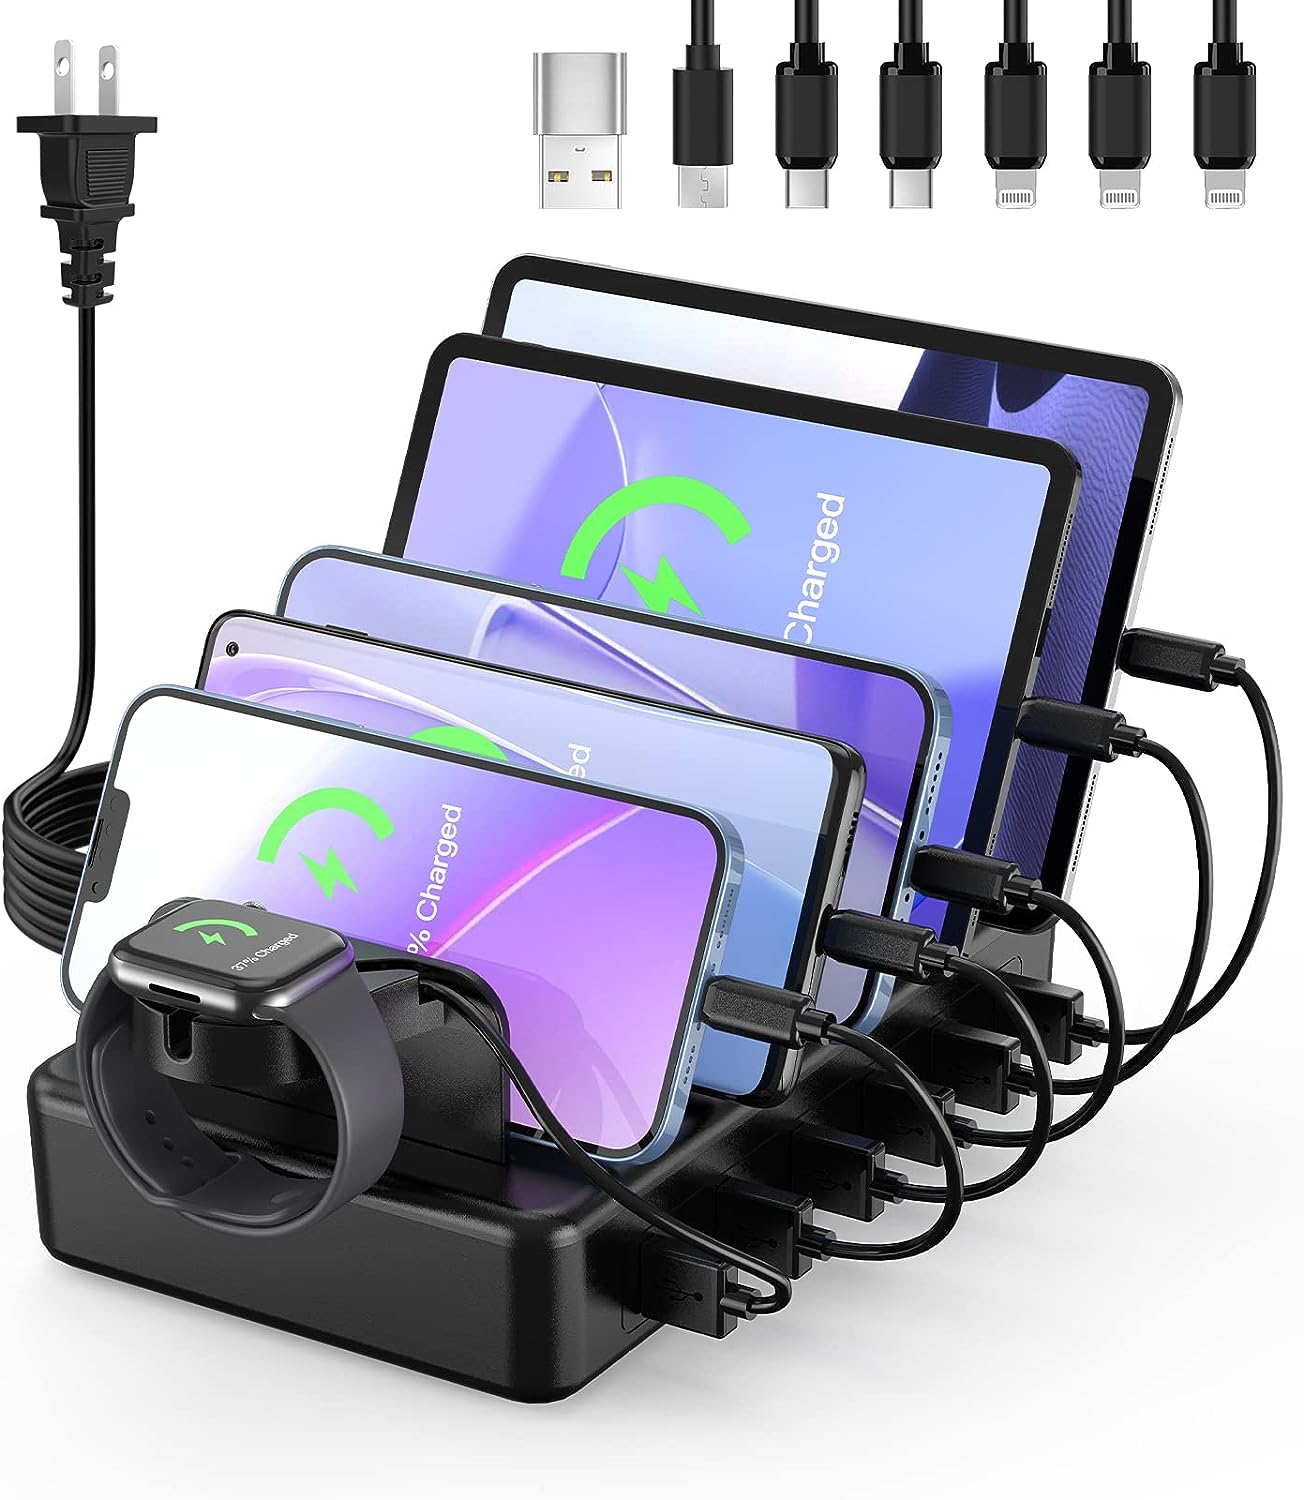 Charging Station for Multiple Devices, HSicily 6 Ports [...]